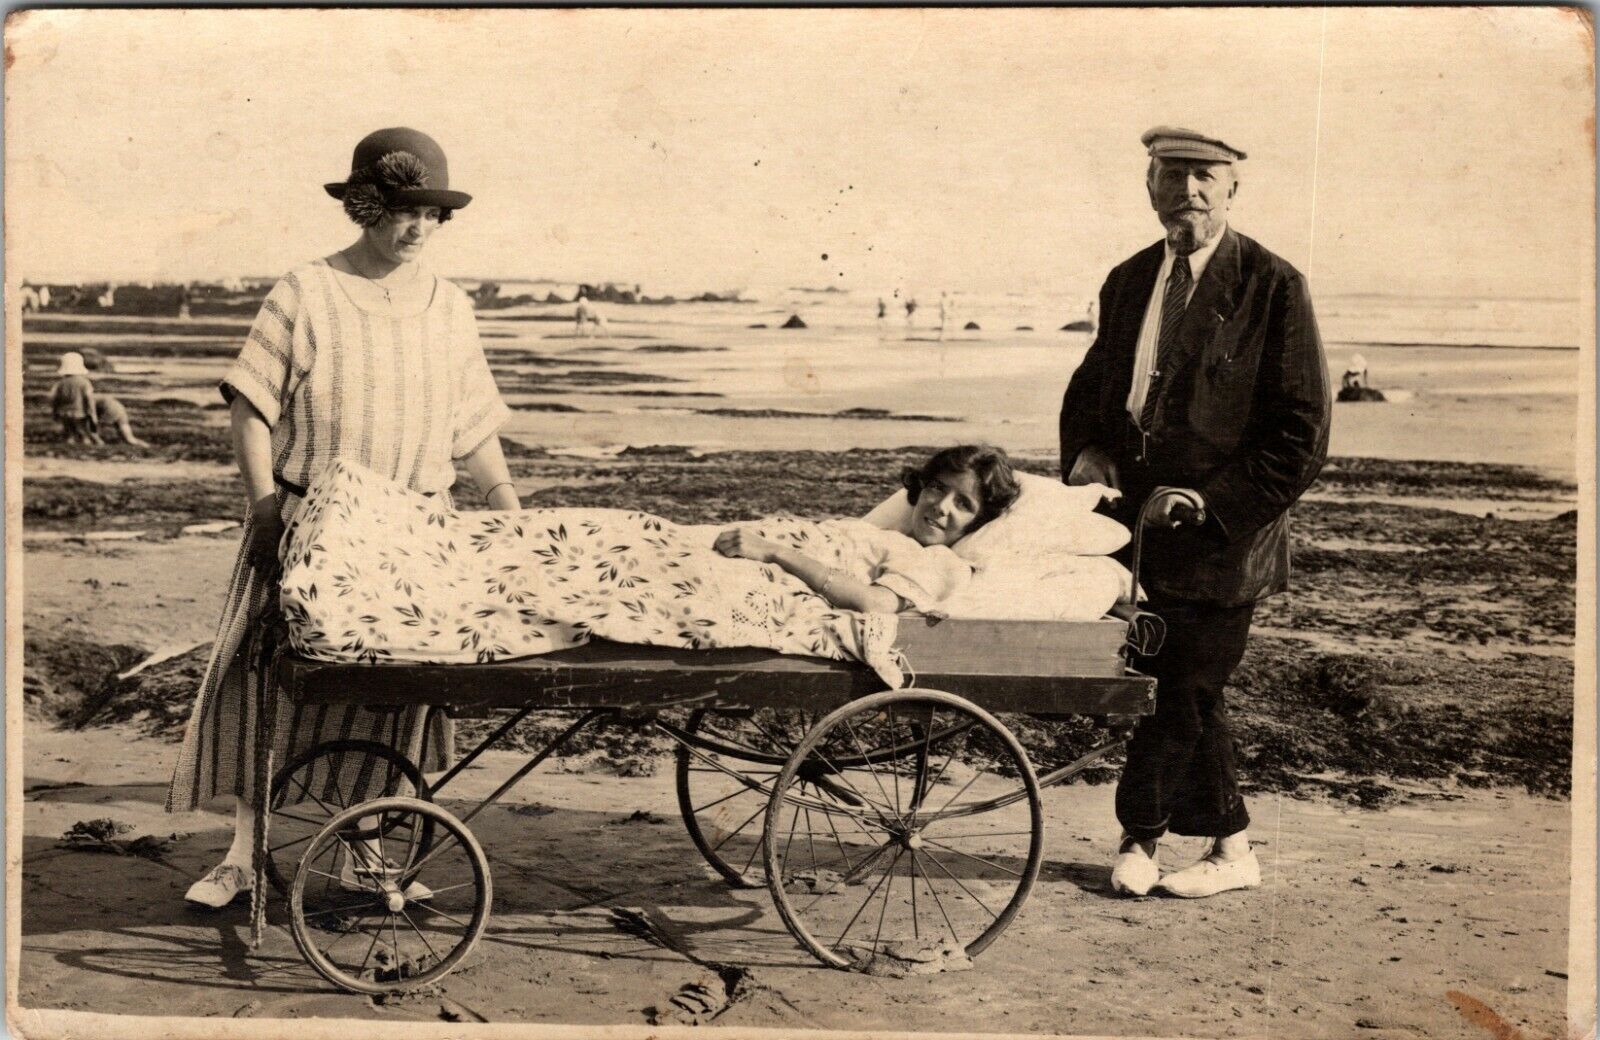 YOUNG BEDRIDDEN WOMAN AT THE BEACH : MOBILE HOSPITAL BED : SPANISH FLU